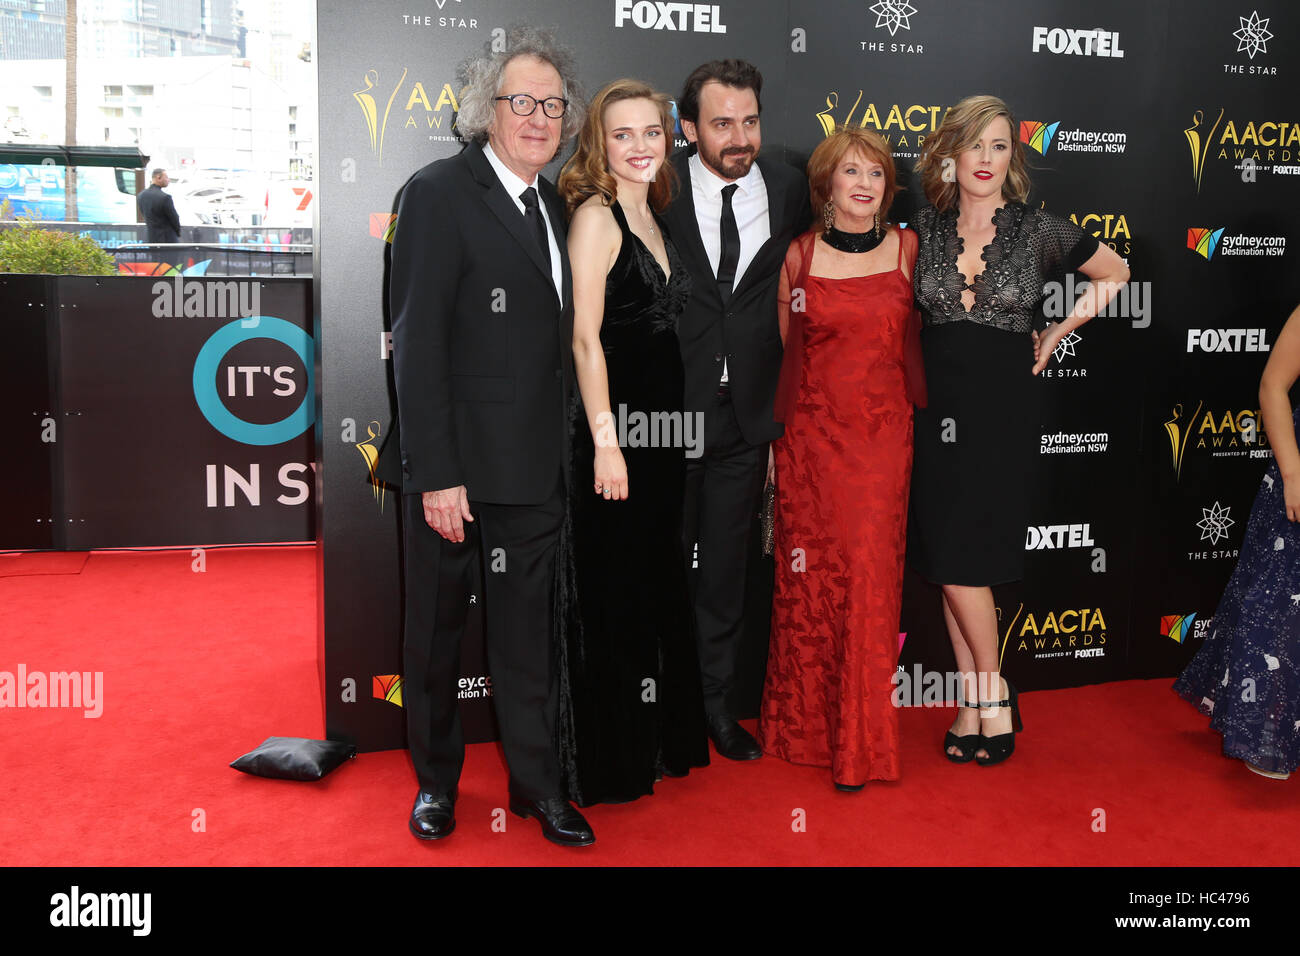 Sydney, Australia. 7 December 2016. Pictured, 'The Daughter' cast and crew, L-R: Geoffrey Rush (Actor - Henry Nielsen), Odessa Young (Actress – Hedvig Finch), Ewen Leslie (Actor - Oliver Finch), Jan Chapman (Producer) and Nicole O’Donohue (Producer). Celebrities, award nominees and industry figures attend the 6th AACTA (Australian Academy of Cinema and Television Arts) Awards at The Star, Pyrmont to celebrate screen excellence. Credit: Credit:  Richard Milnes/Alamy Live News Stock Photo